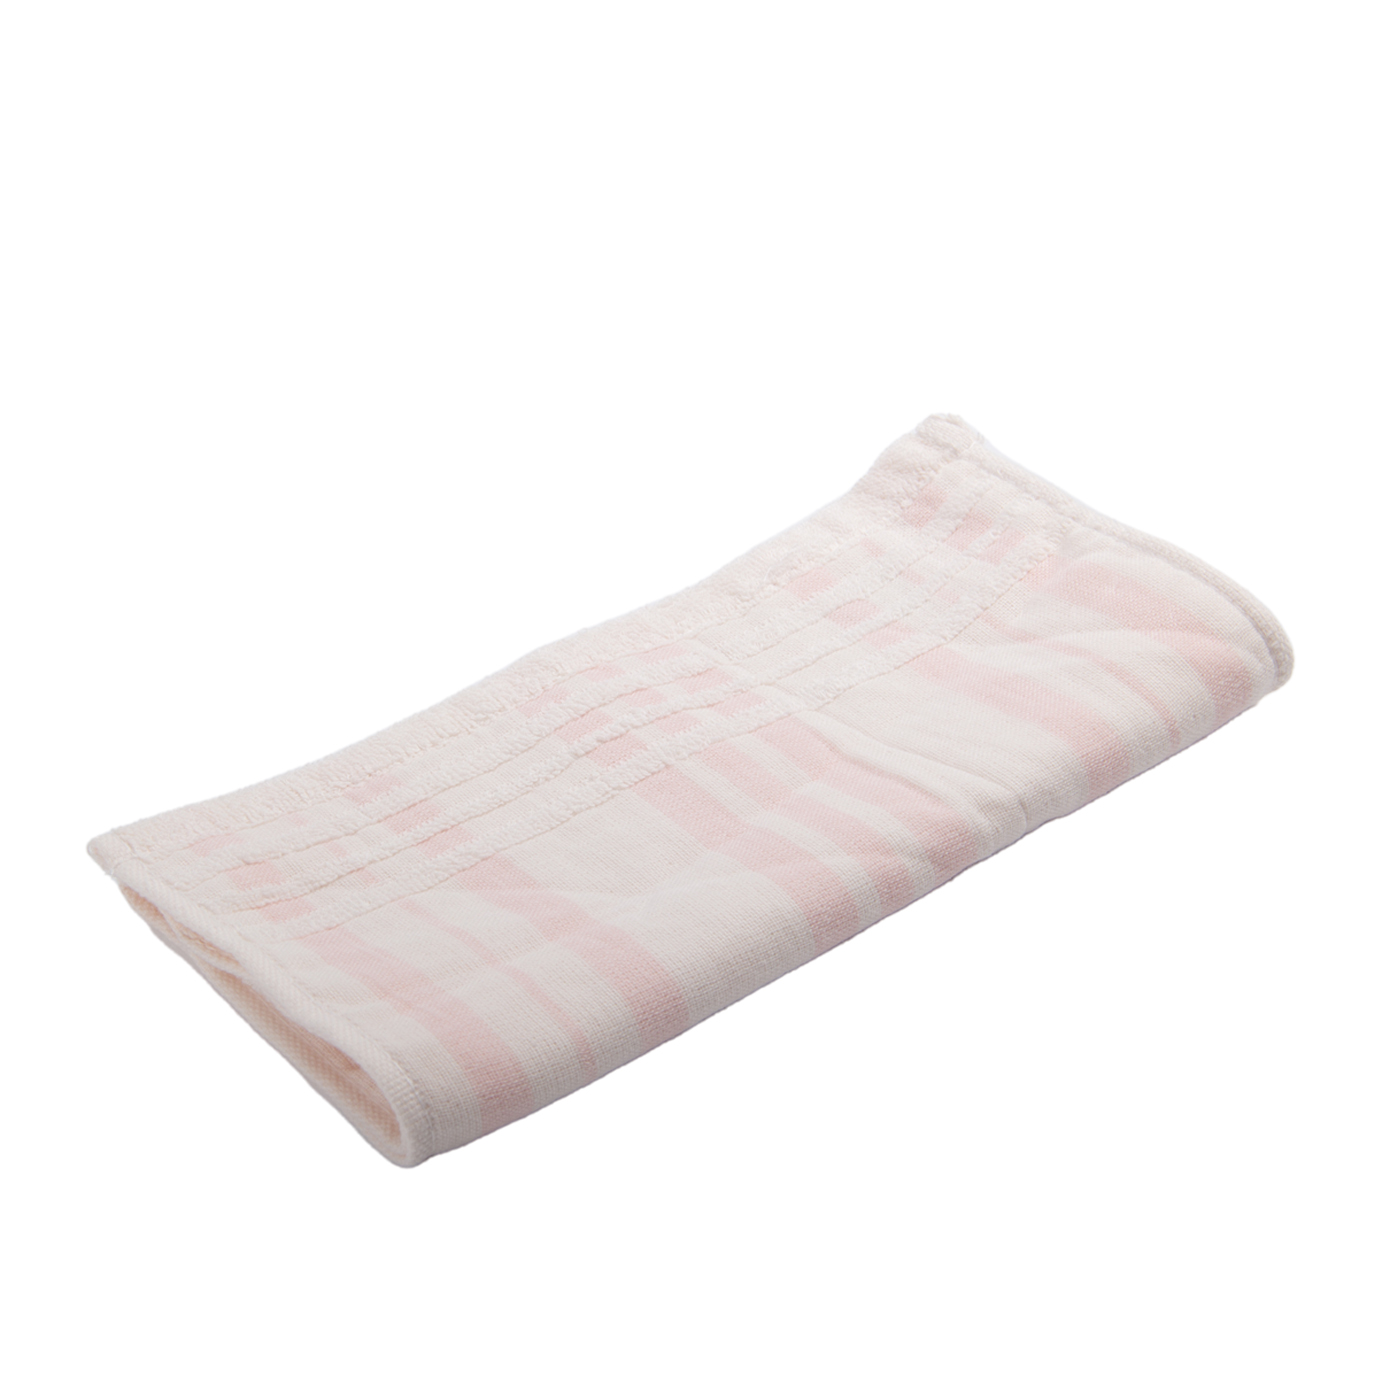 Kids' Embroidered Cotton Towel1